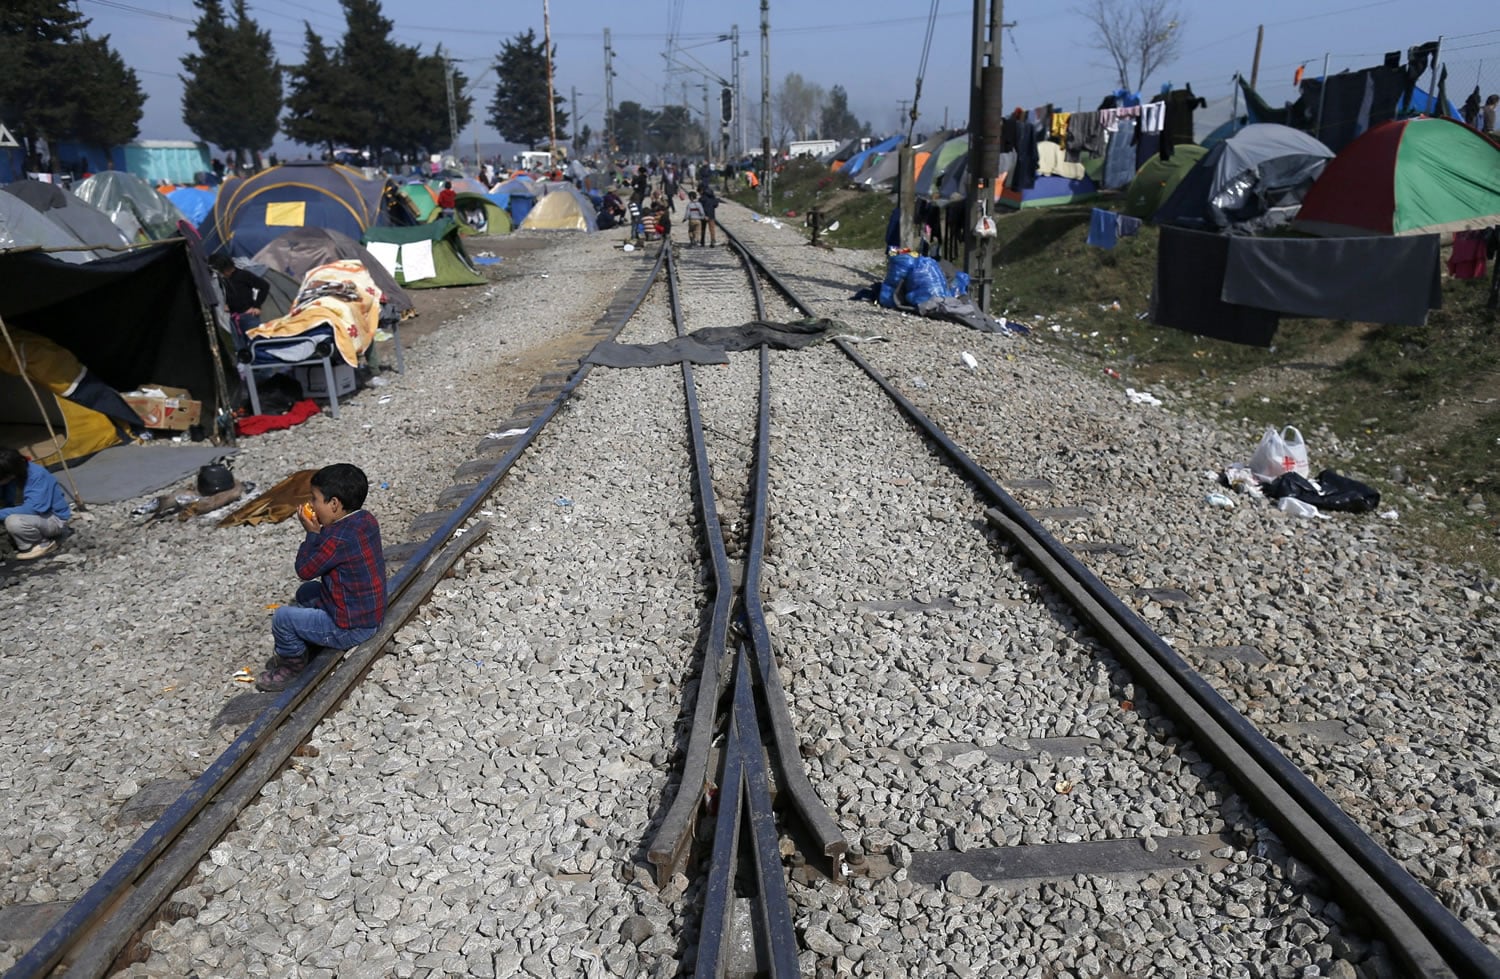 A migrant boy eats at a train station near a makeshift refugee camp Monday at the northern Greek border point of Idomeni, Greece. Hundreds of mostly Syrian asylum-seekers continued to arrive in Greece by sea.